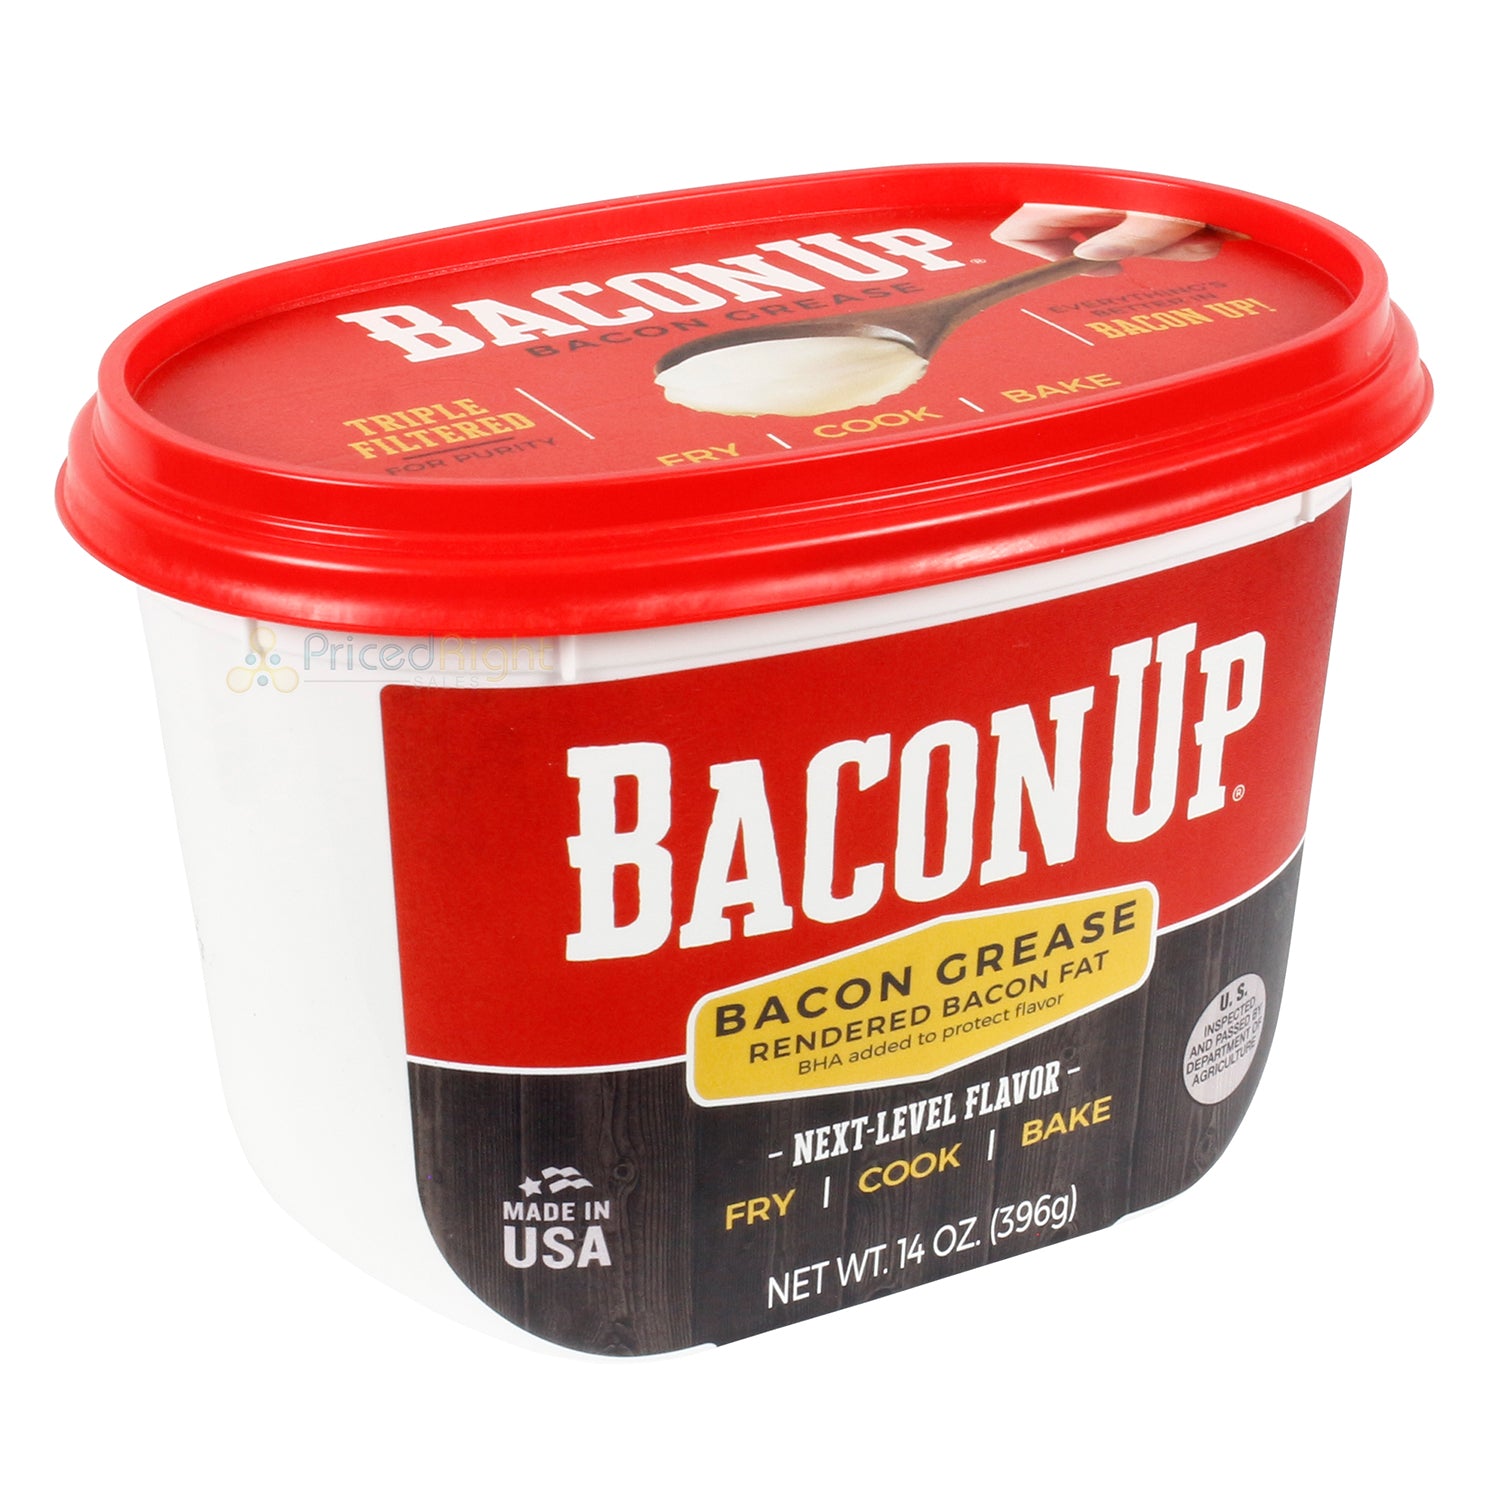 Cooking with Texas company Bacon Up's bacon grease